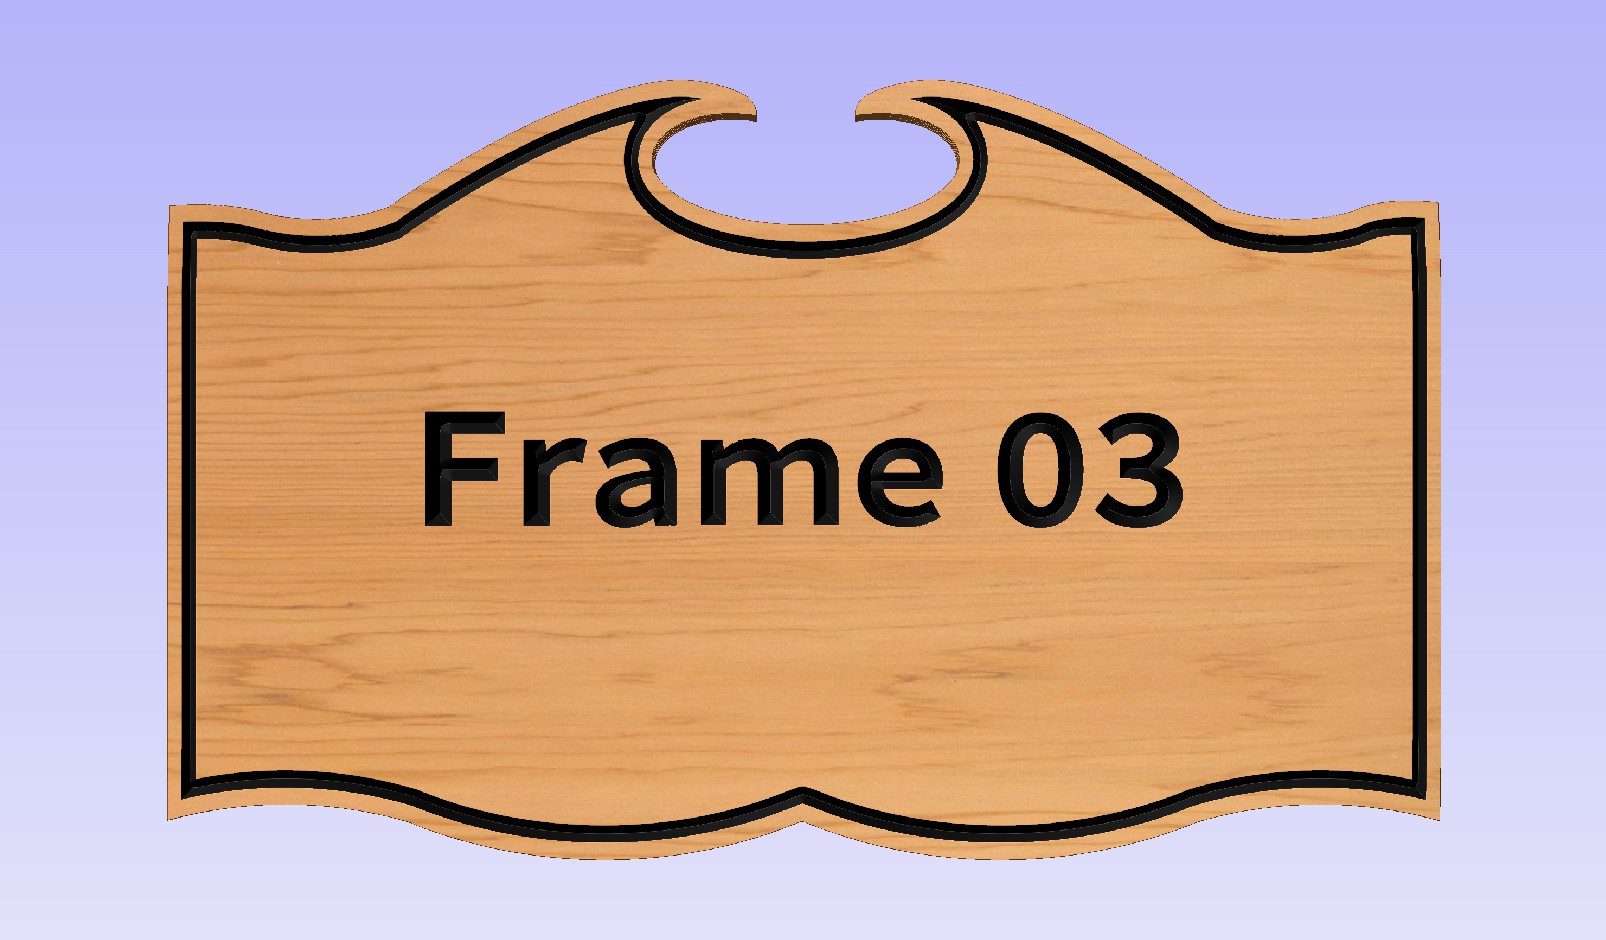 This Frame requires a 13.5" x 23"  or larger sign.